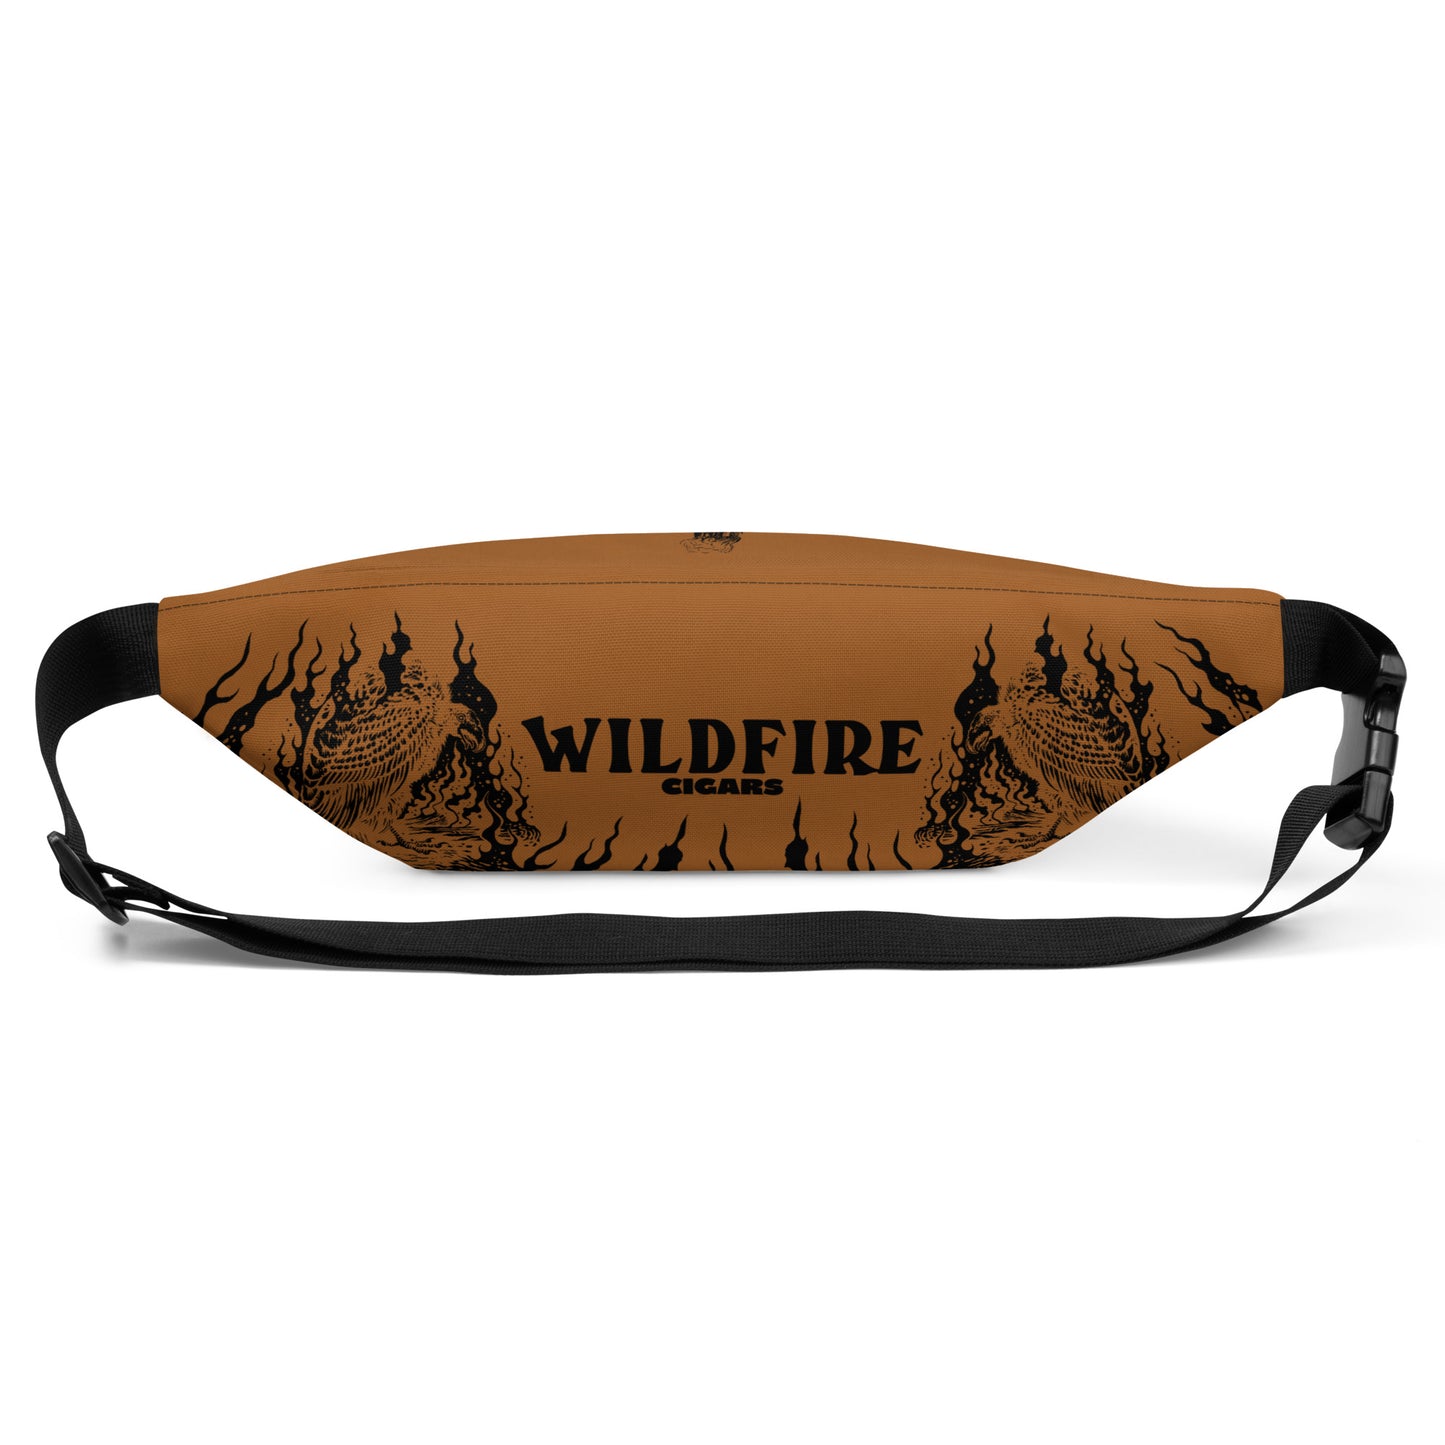 Wildfire Cigars retro vulture fanny pack in brown